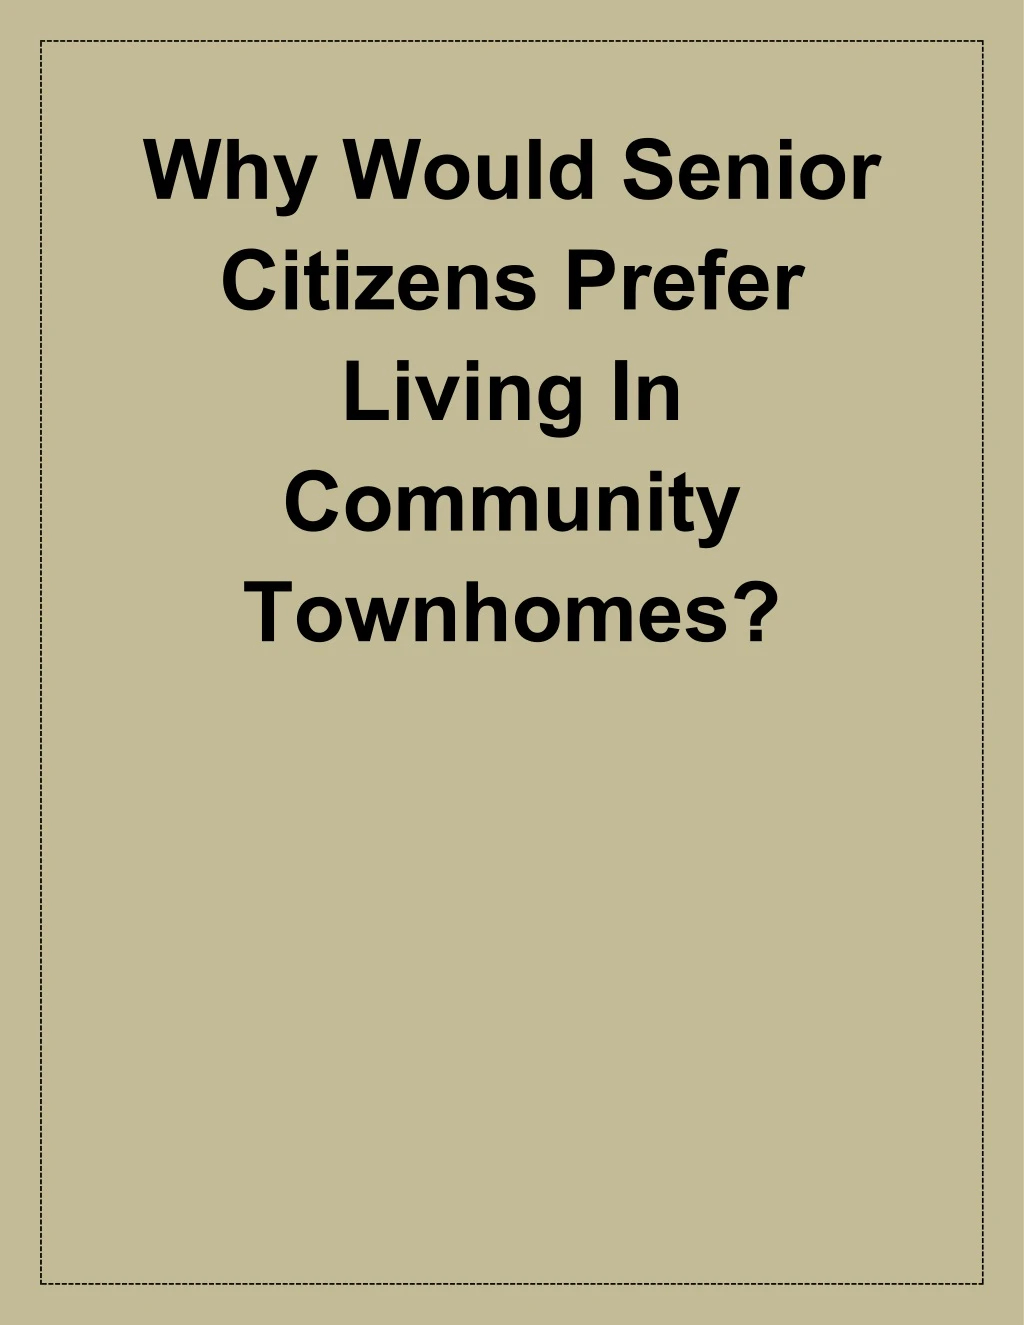 why would senior citizens prefer living